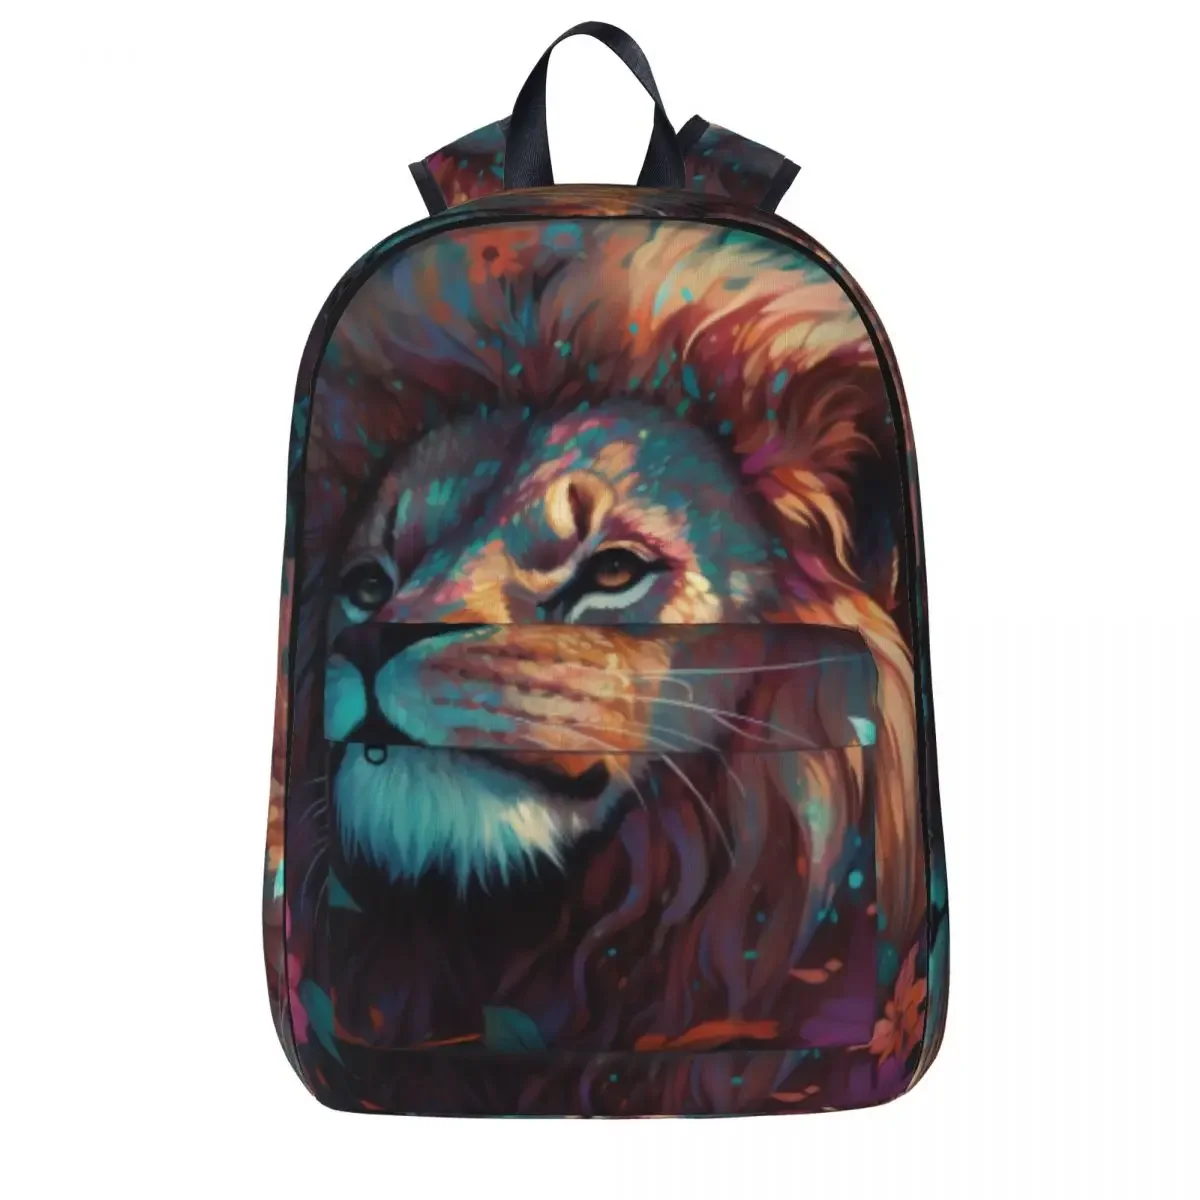 

Lion Backpack Colorful Painting Neon Style Backpacks Men Camping Print High School Bags High Quality Rucksack